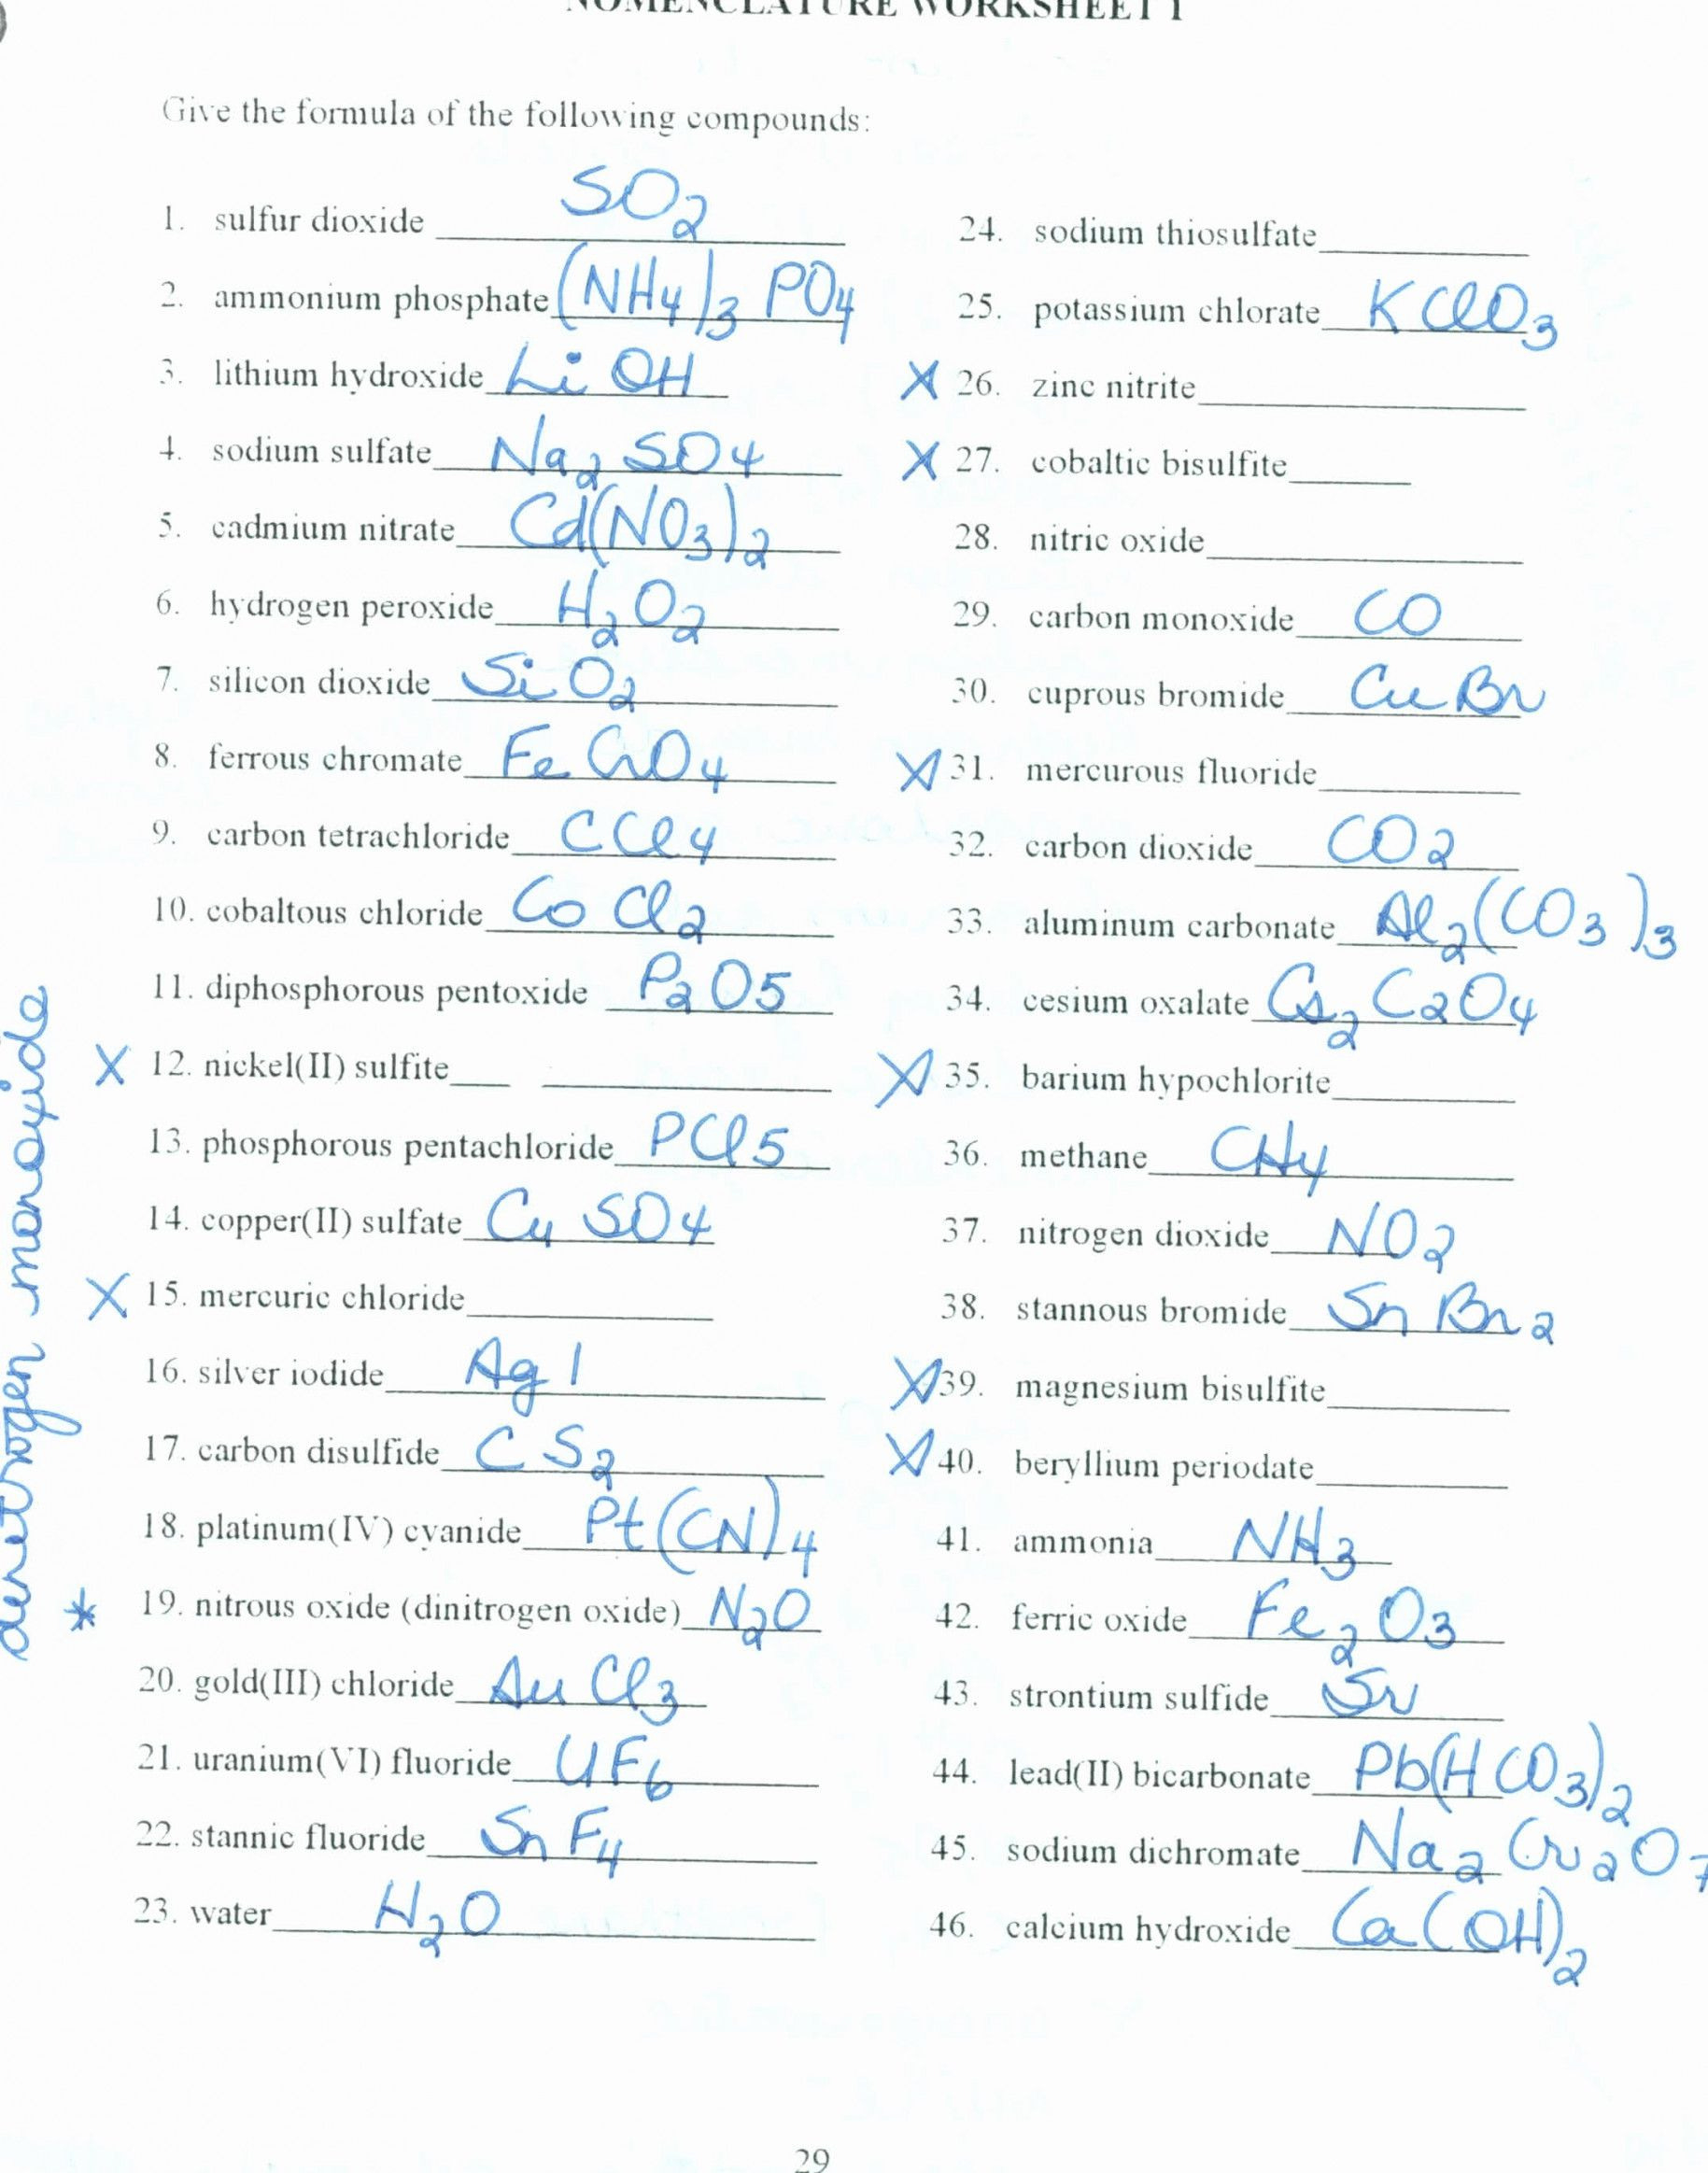 chemistry-nomenclature-worksheet-answers-db-excel